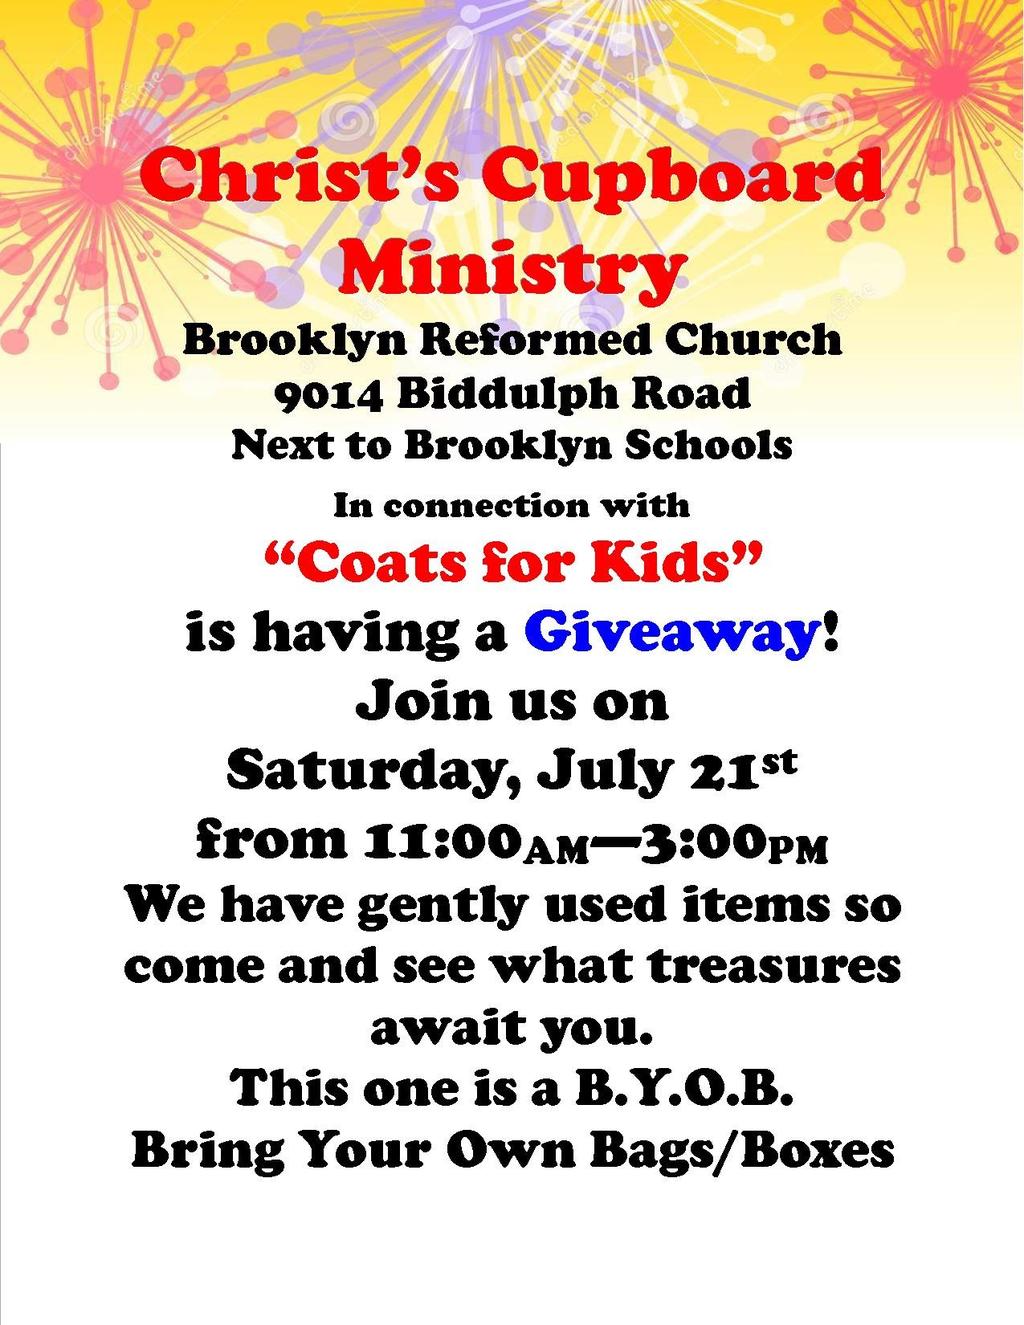 Christ s Cupboard has been blessed with so many donations that we asked for and received permission to have a giveaway in July. We would love to have you join us!